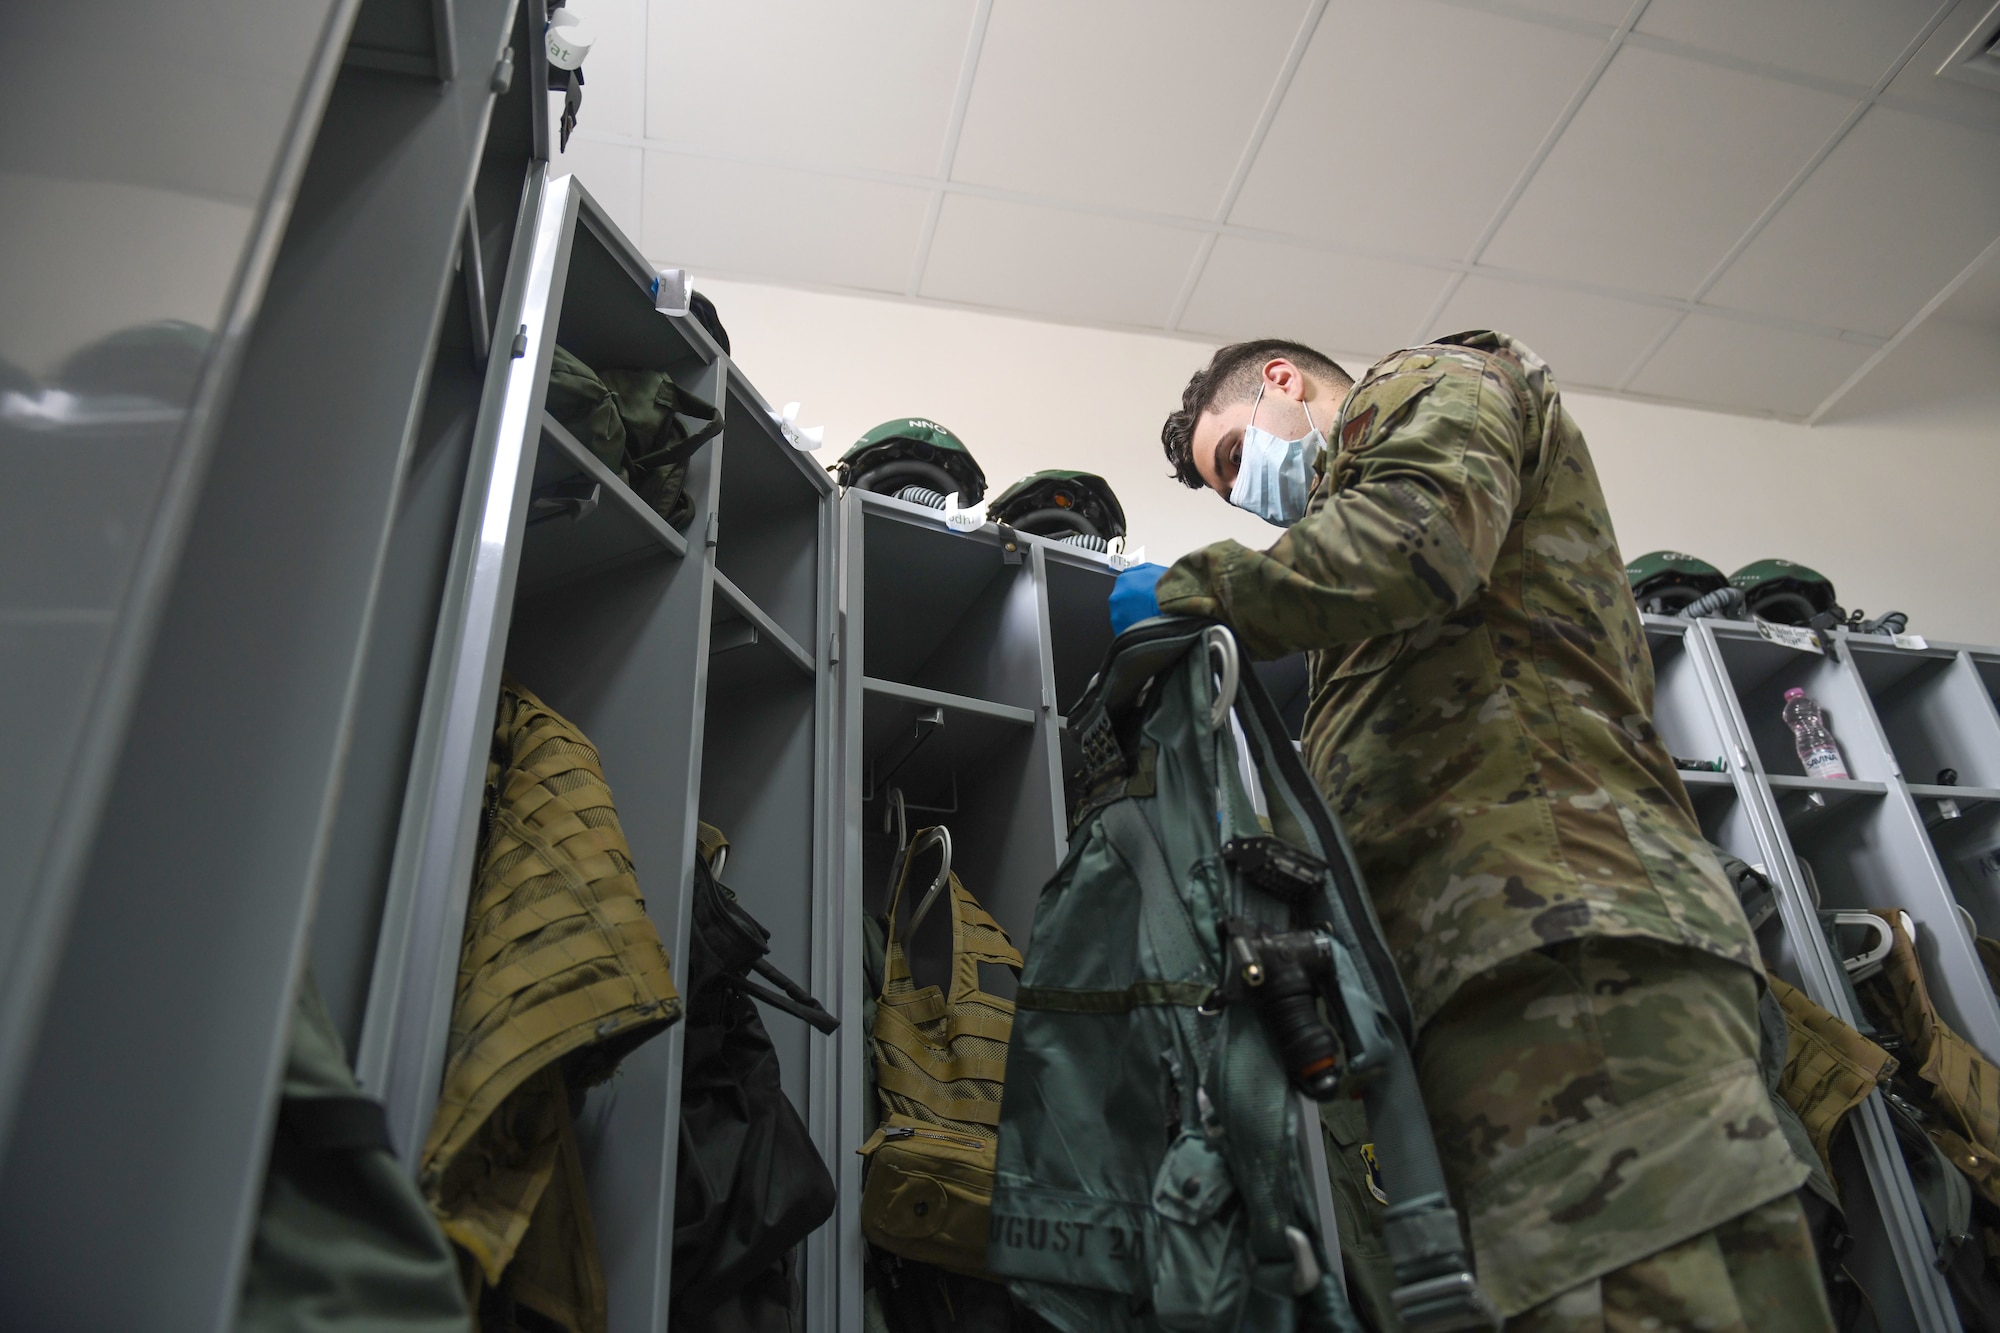 Airman 1st Class Matthew Giordano, 31st Operations Support Squadron aircrew flight equipment technician, inspects a harness during NATO enhanced Air Policing at Graf Ignatievo Air Base, Bulgaria, Oct. 13, 2020. NATO eAP is a specific assurance measure to demonstrate NATO’s solidarity, collective resolve, and its ability to adapt and scale its defensive missions and deterrence posture in response to the evolving security situation. (U.S. Air Force photo by Airman 1st Class Ericka A. Woolever)